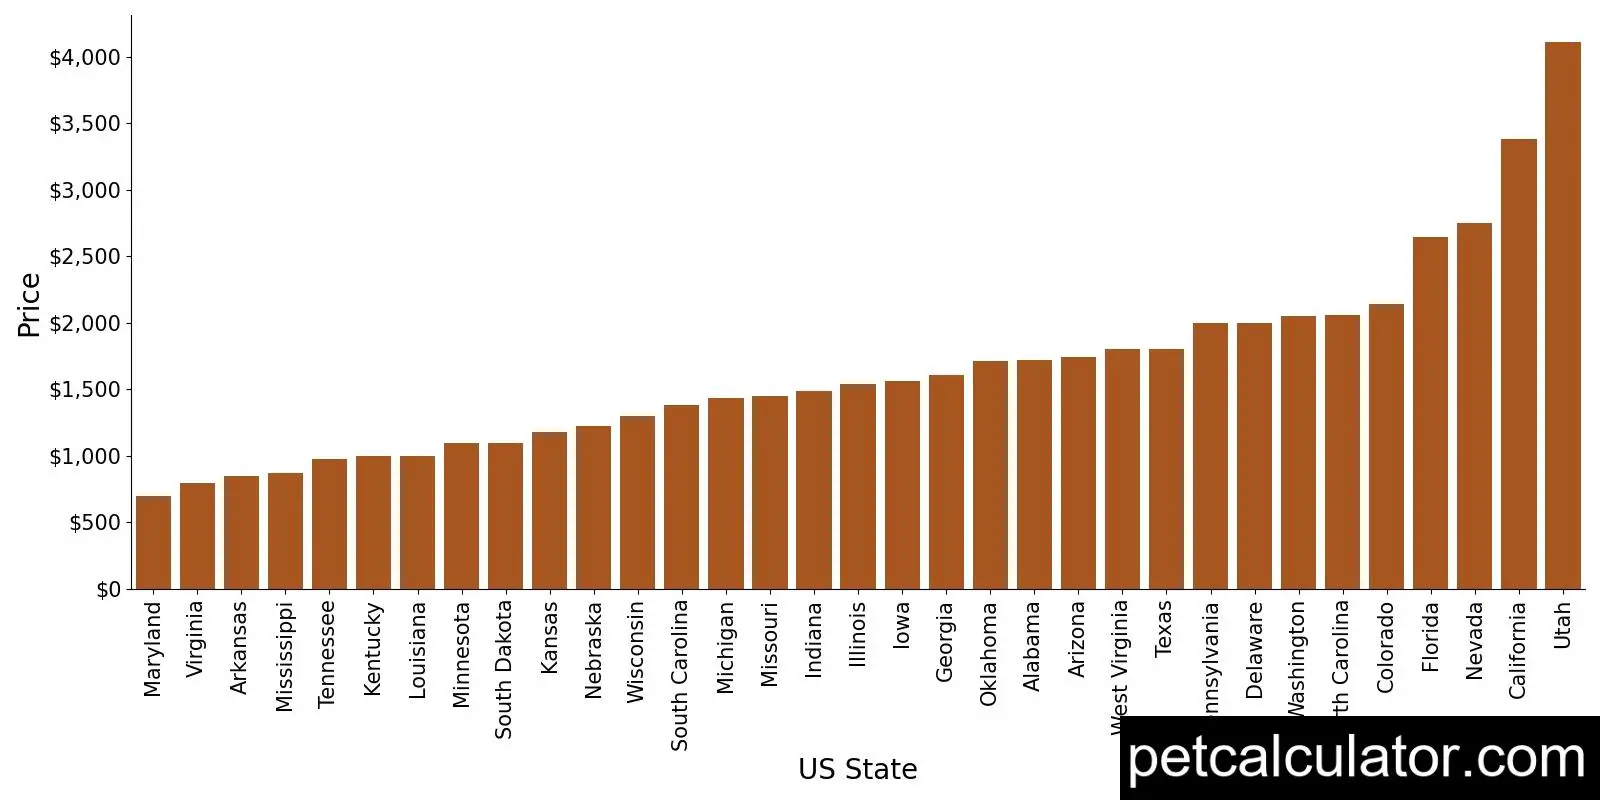 Price of Toy Australian Shepherd by US State 